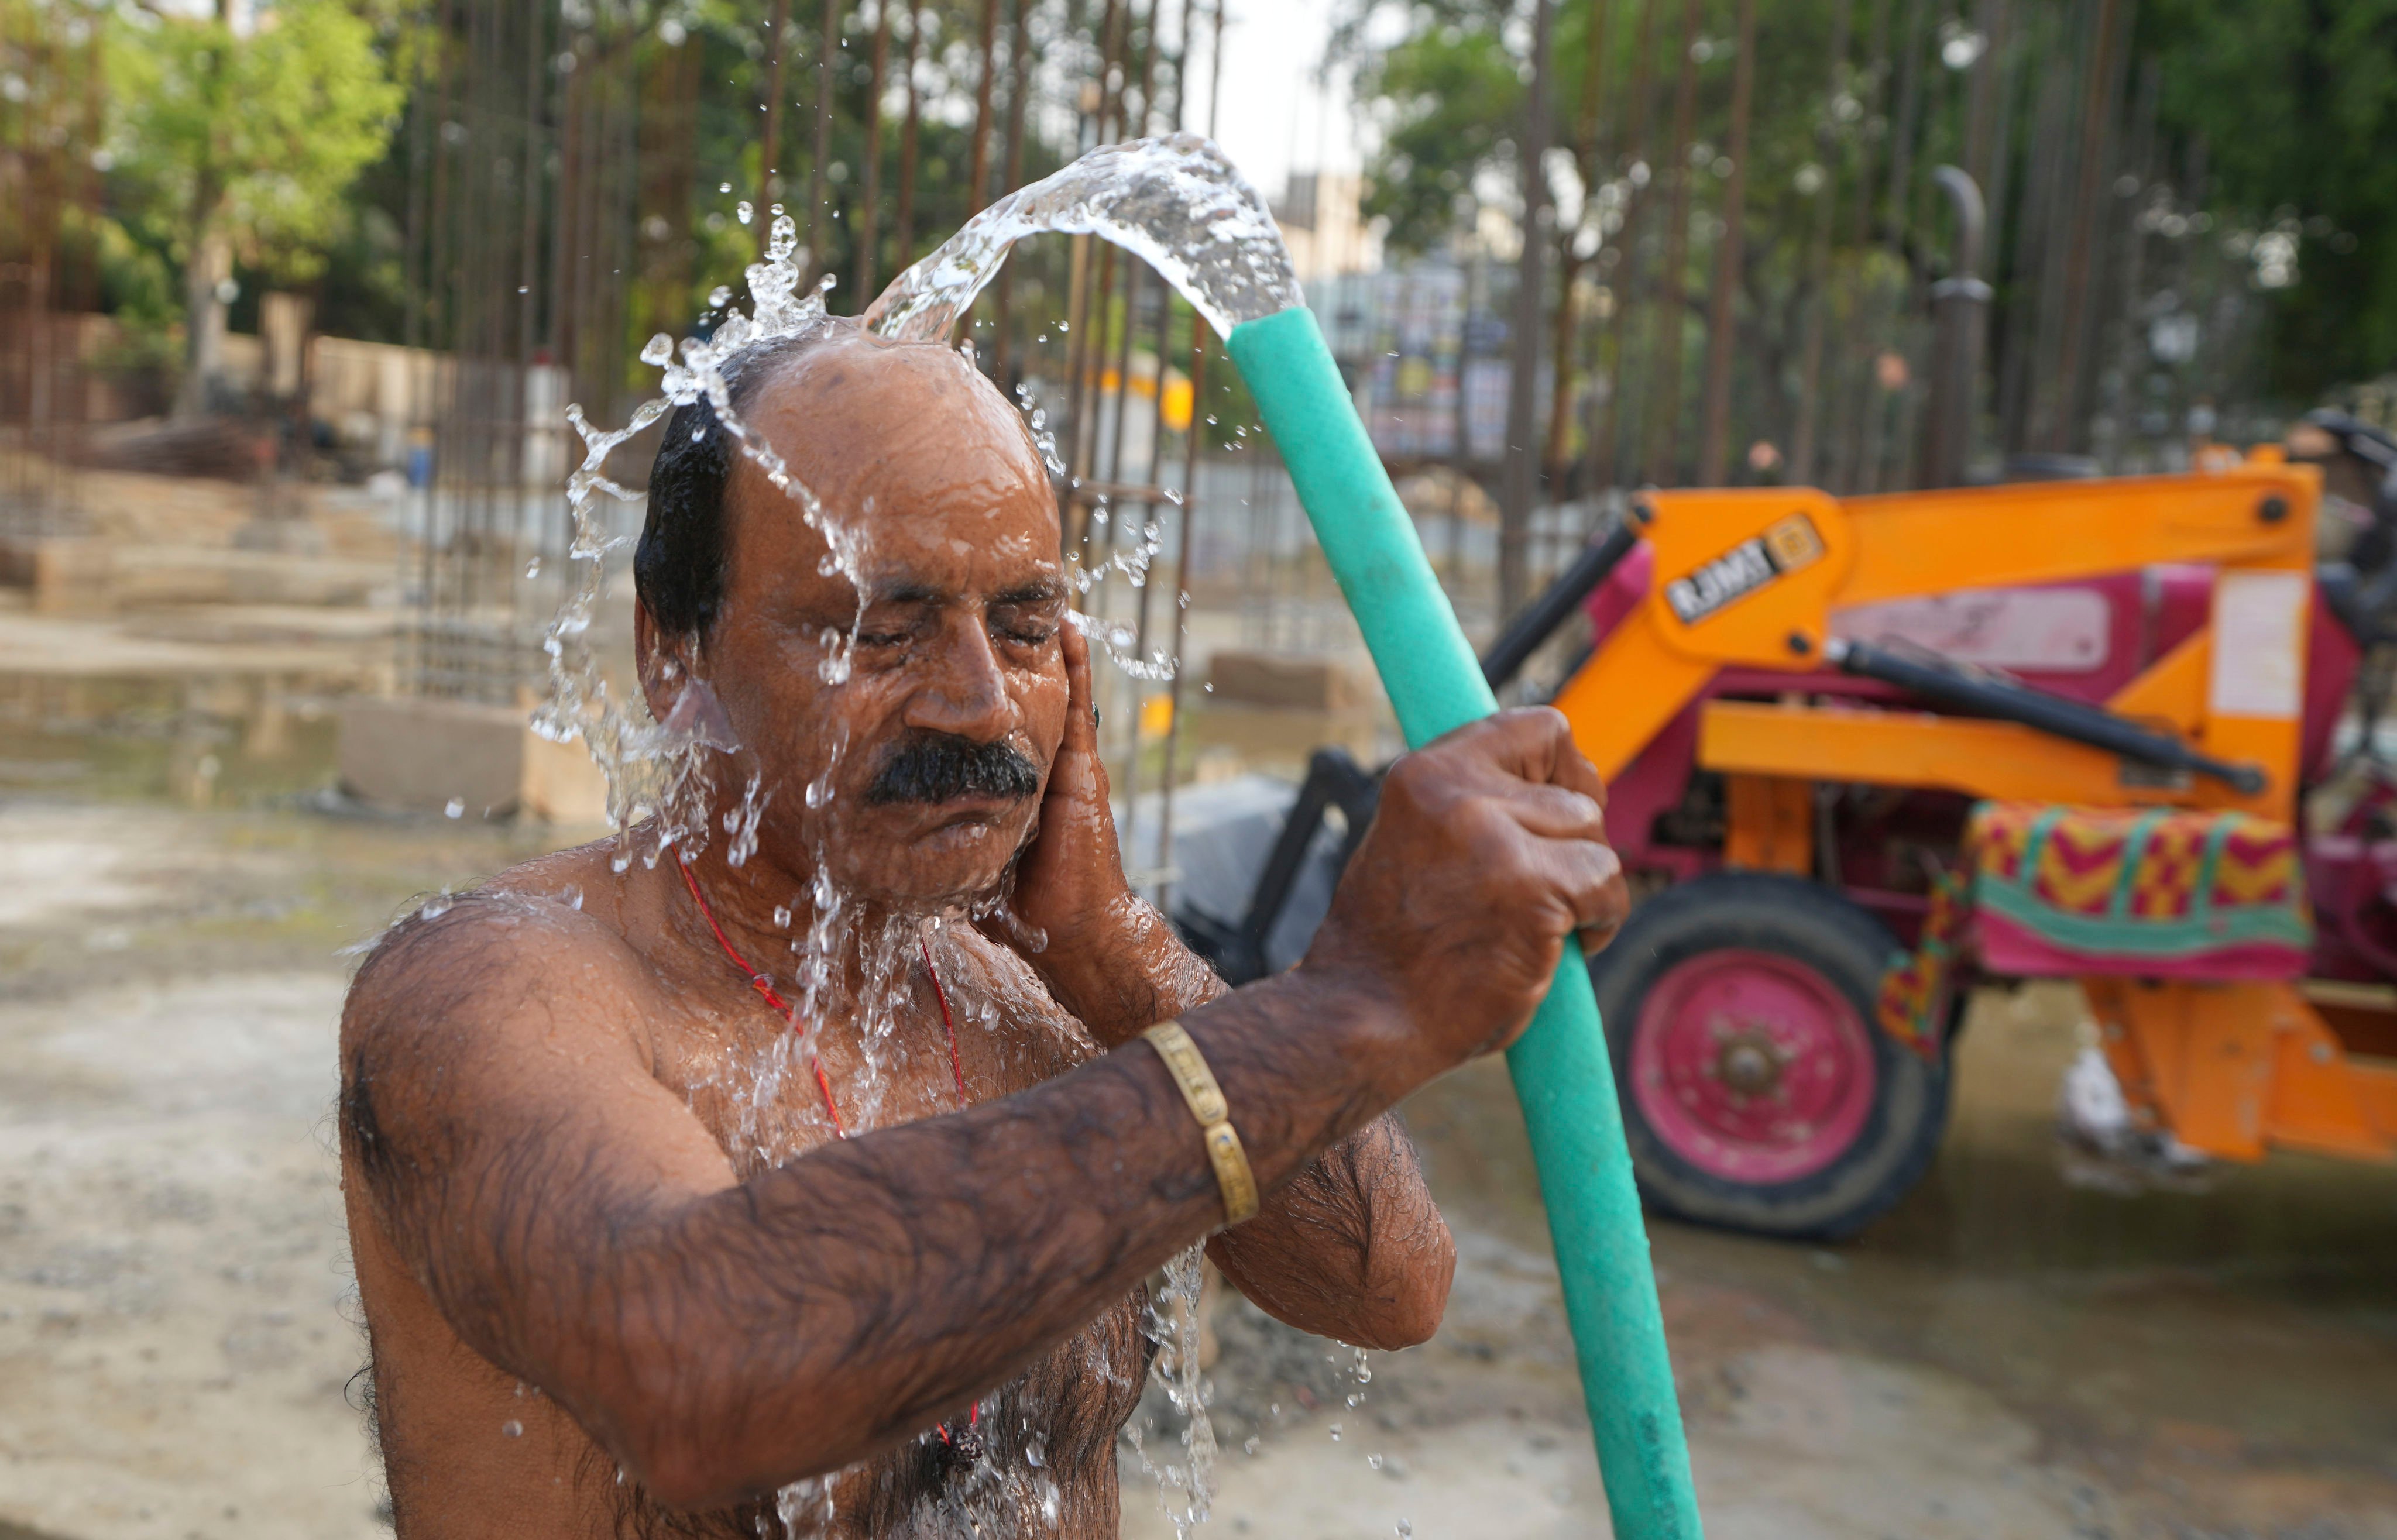 An Indian worker tries to cool off on a hot day in Prayagraj, northern Uttar Pradesh state. Photo: AP